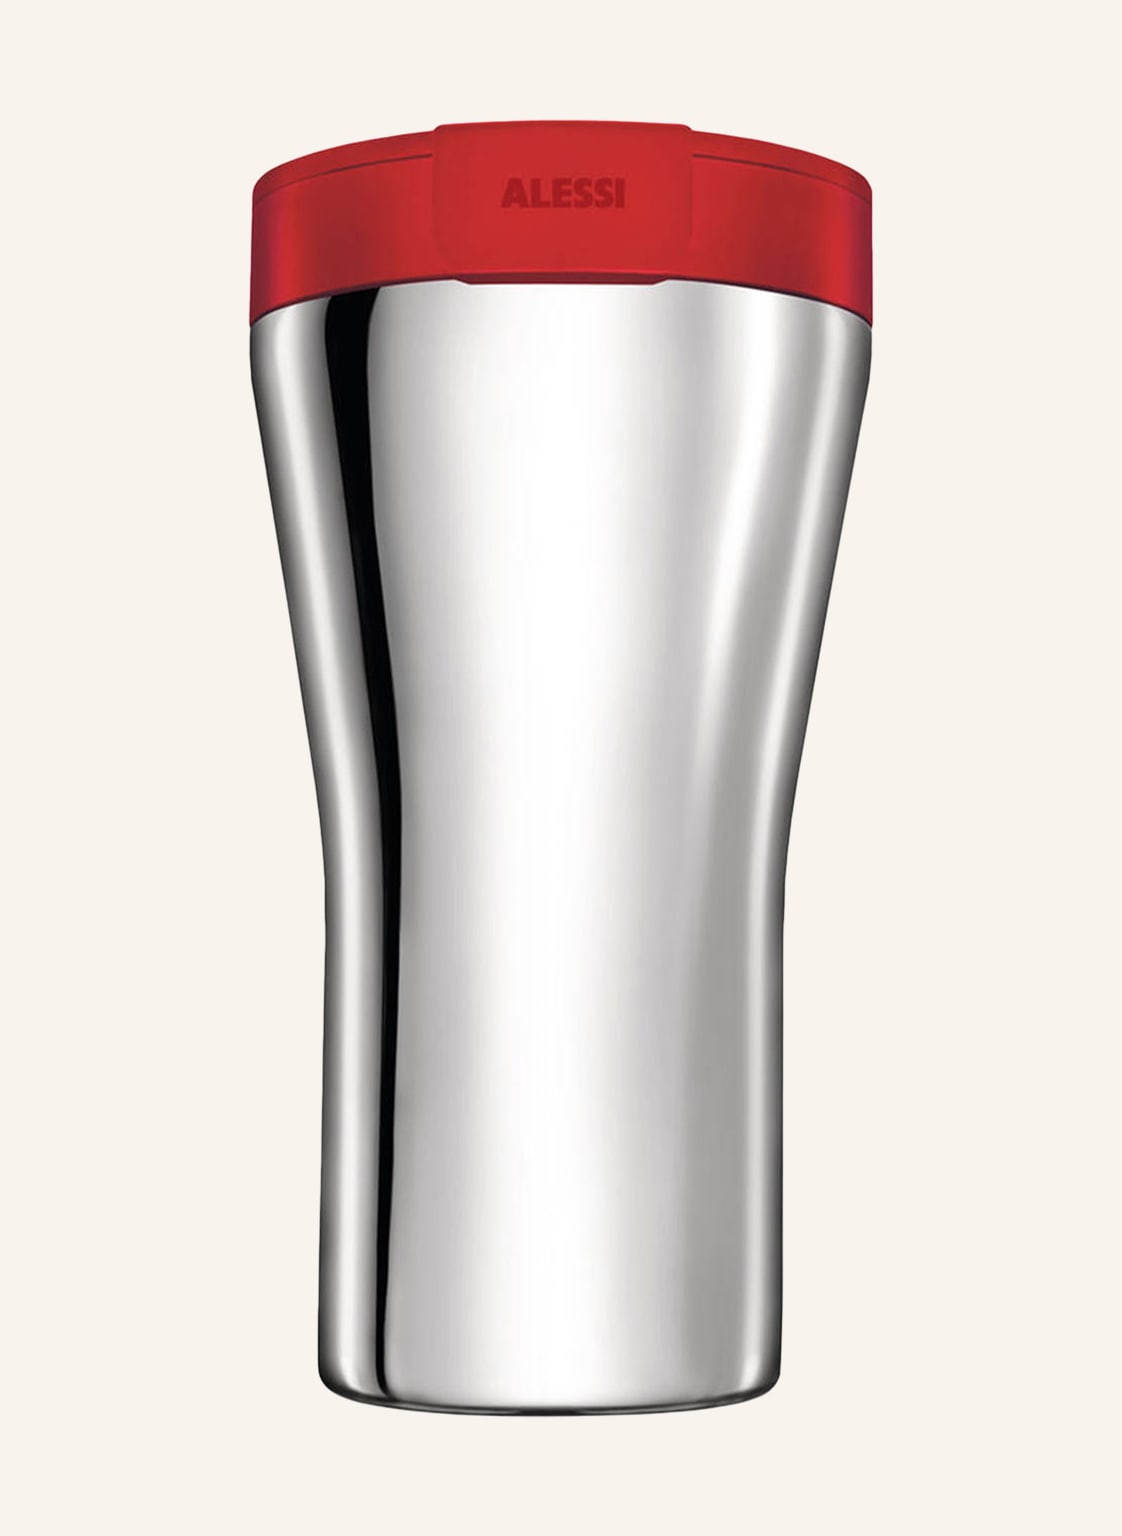 Image of Alessi Thermobecher Caffa silber